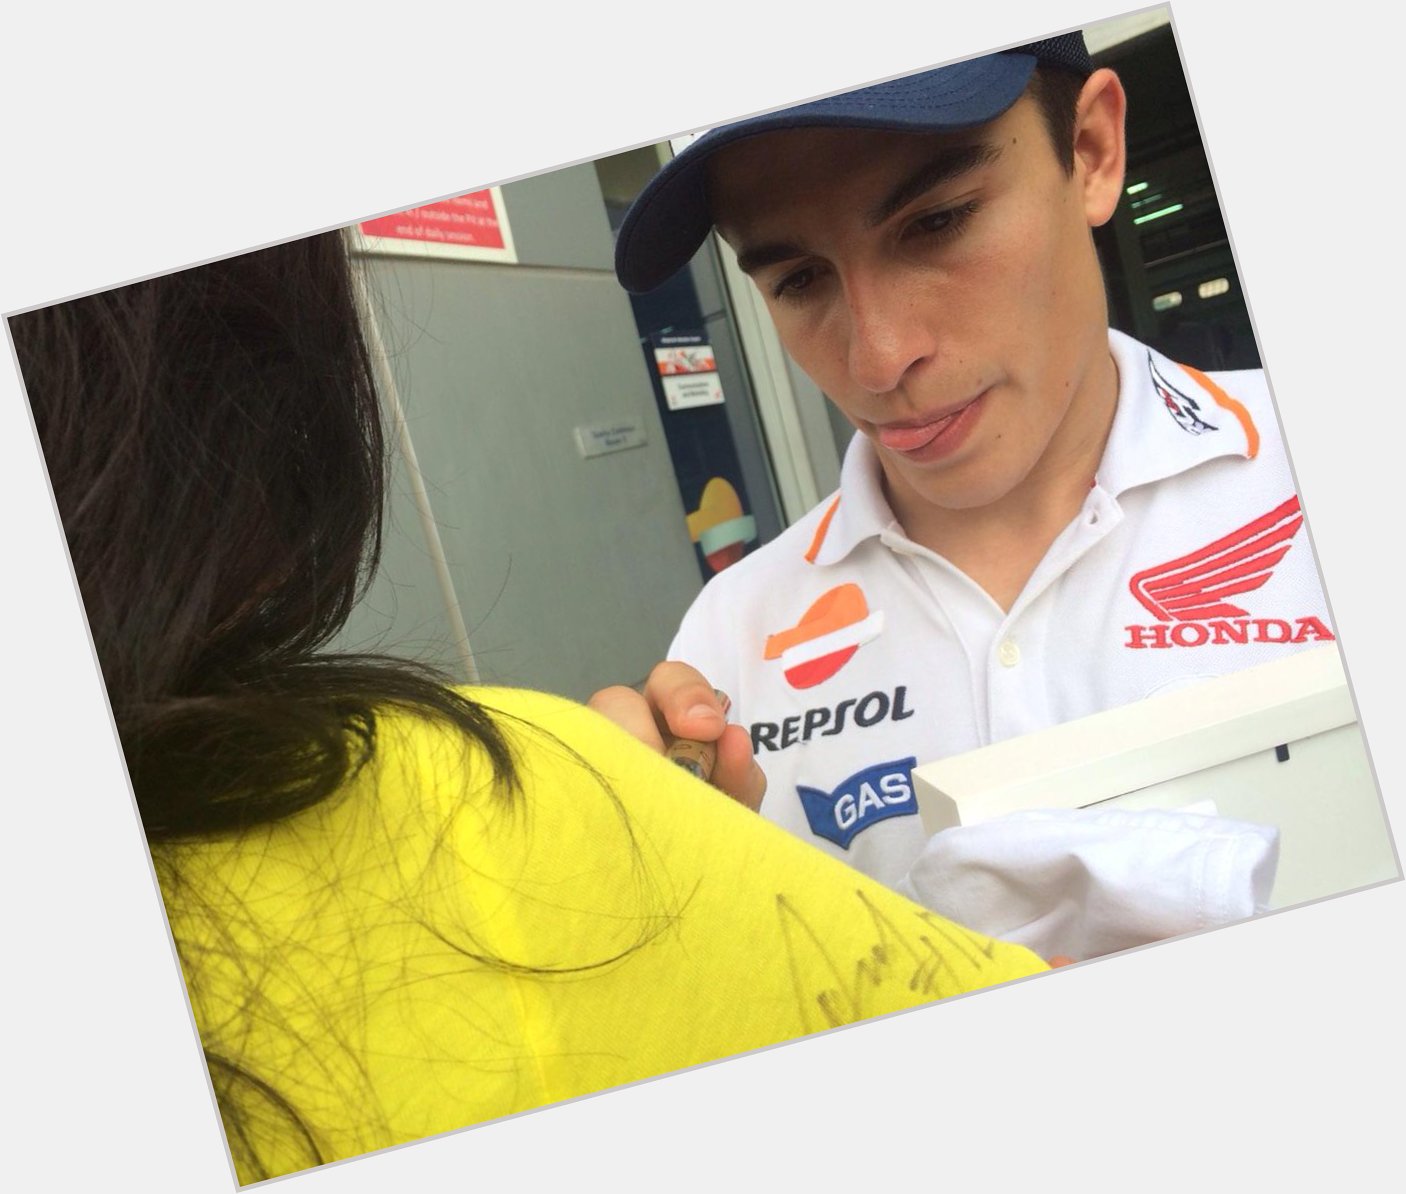 Jee, what day today? We should say a happy bday to Marc Marquez, and myself, hope a blessing and a health for him. 